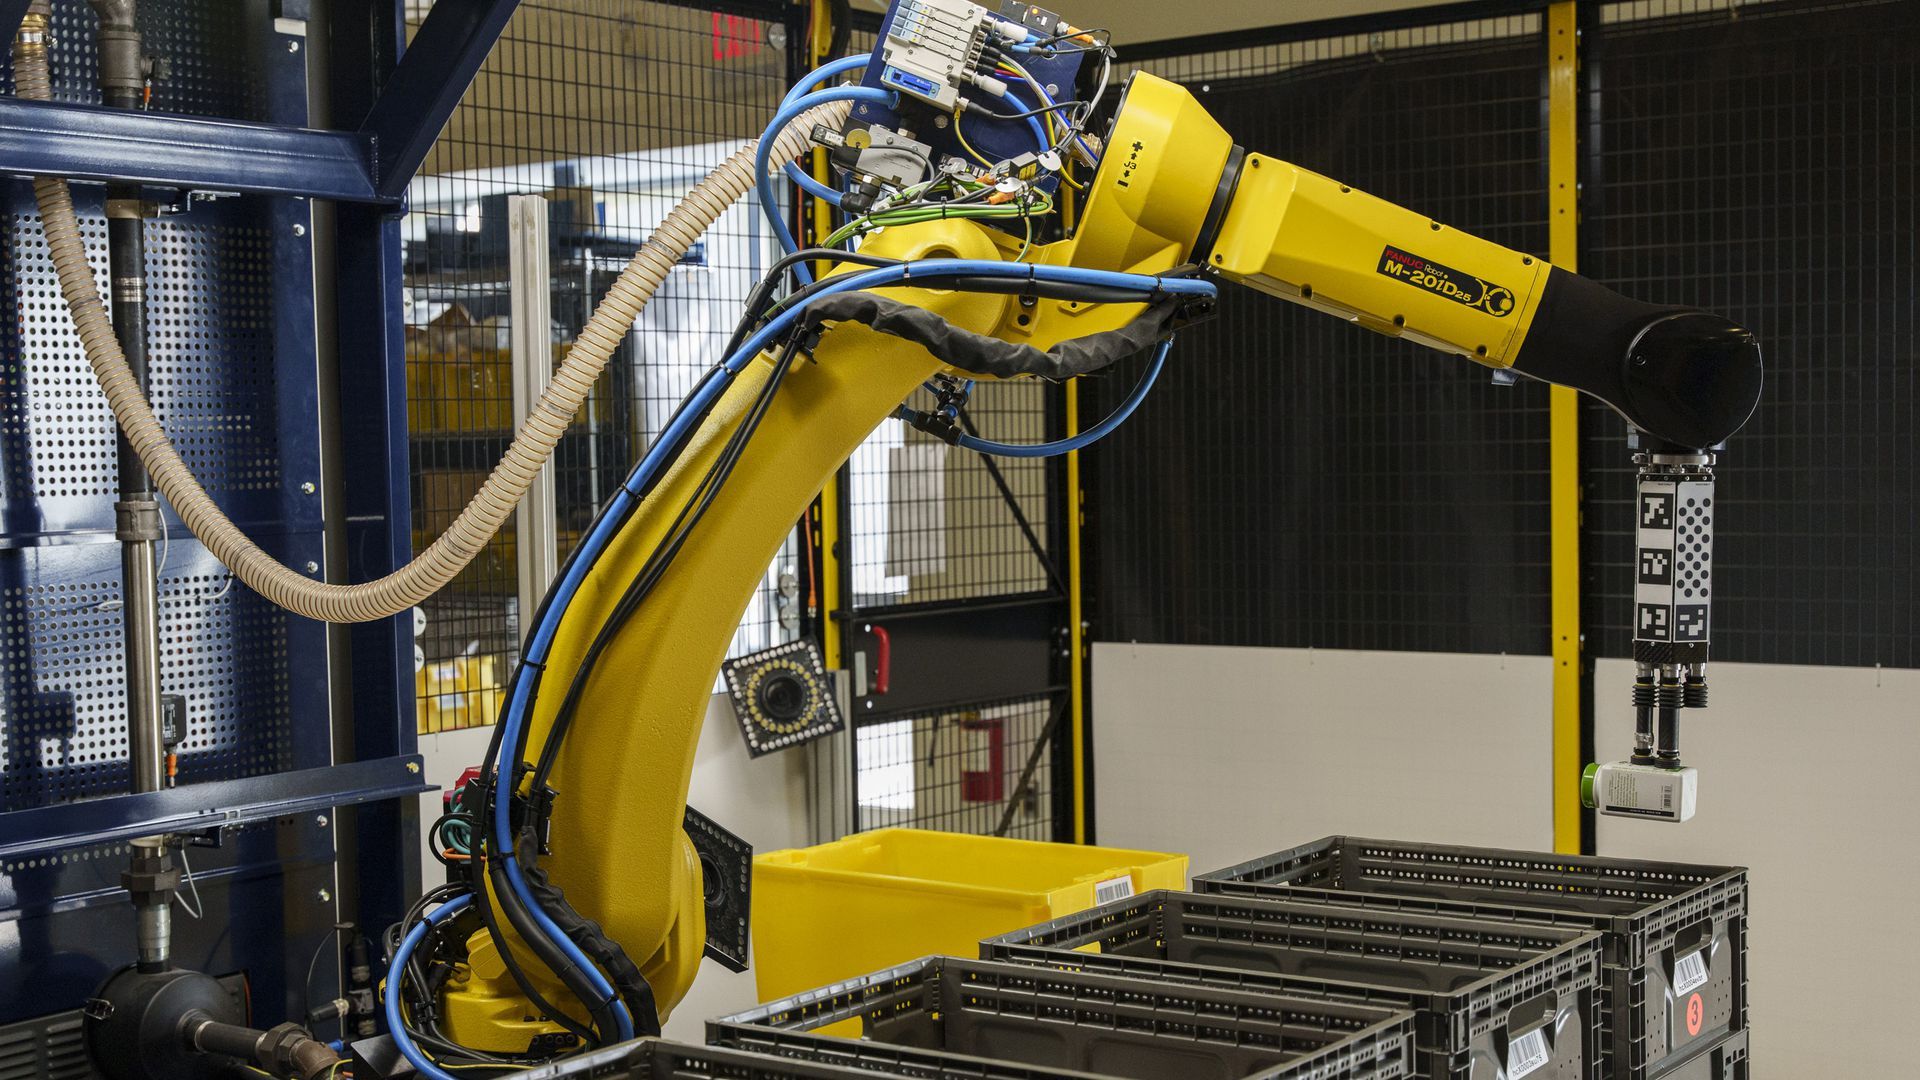 tub TRUE Utilfreds Amazon can't get enough human workers — so here come the robots